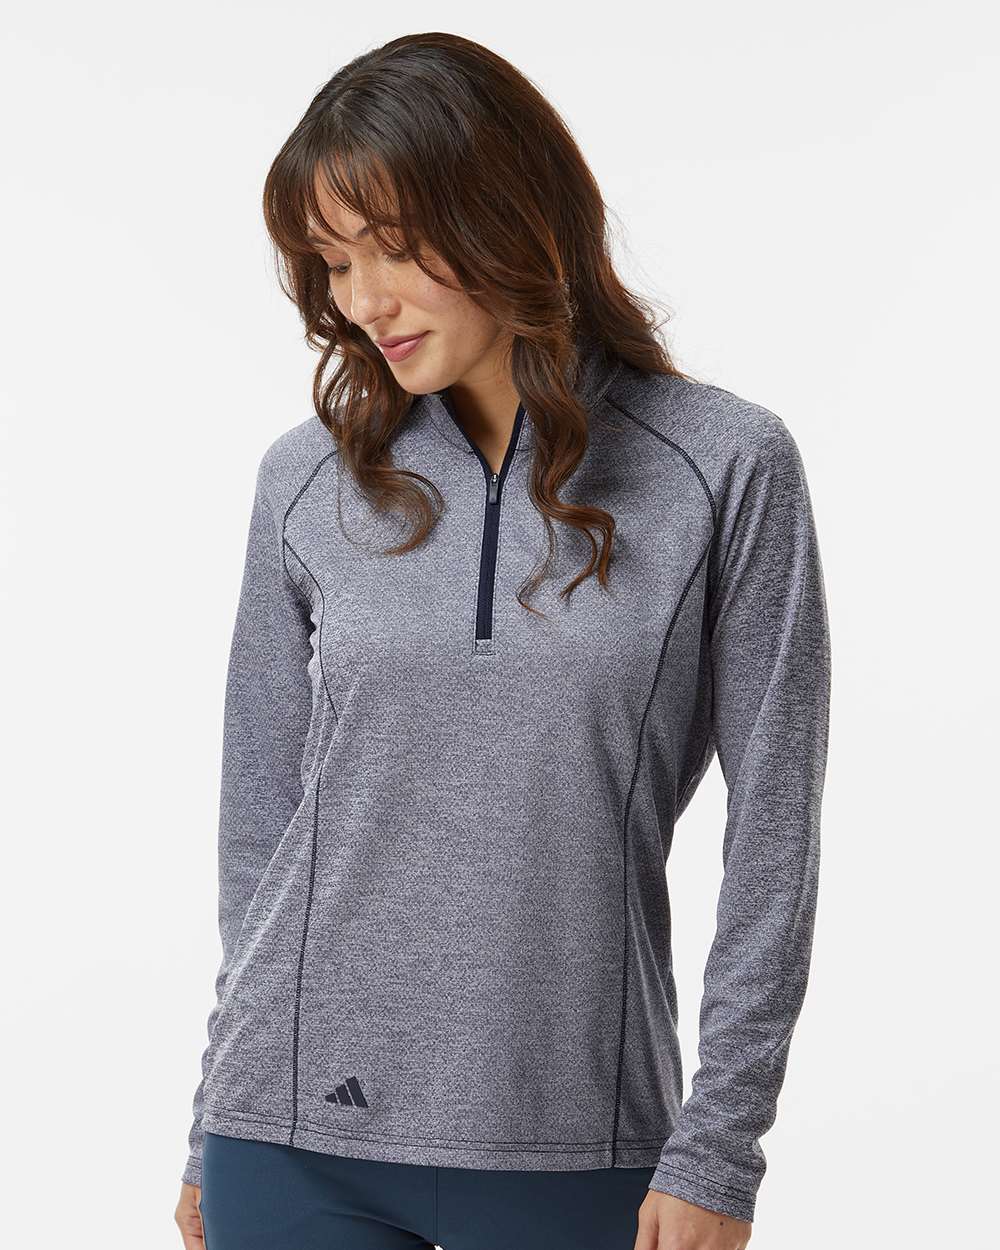 Adidas A594 Women's Space Dyed Quarter-Zip Pullover #colormdl_Collegiate Navy Melange